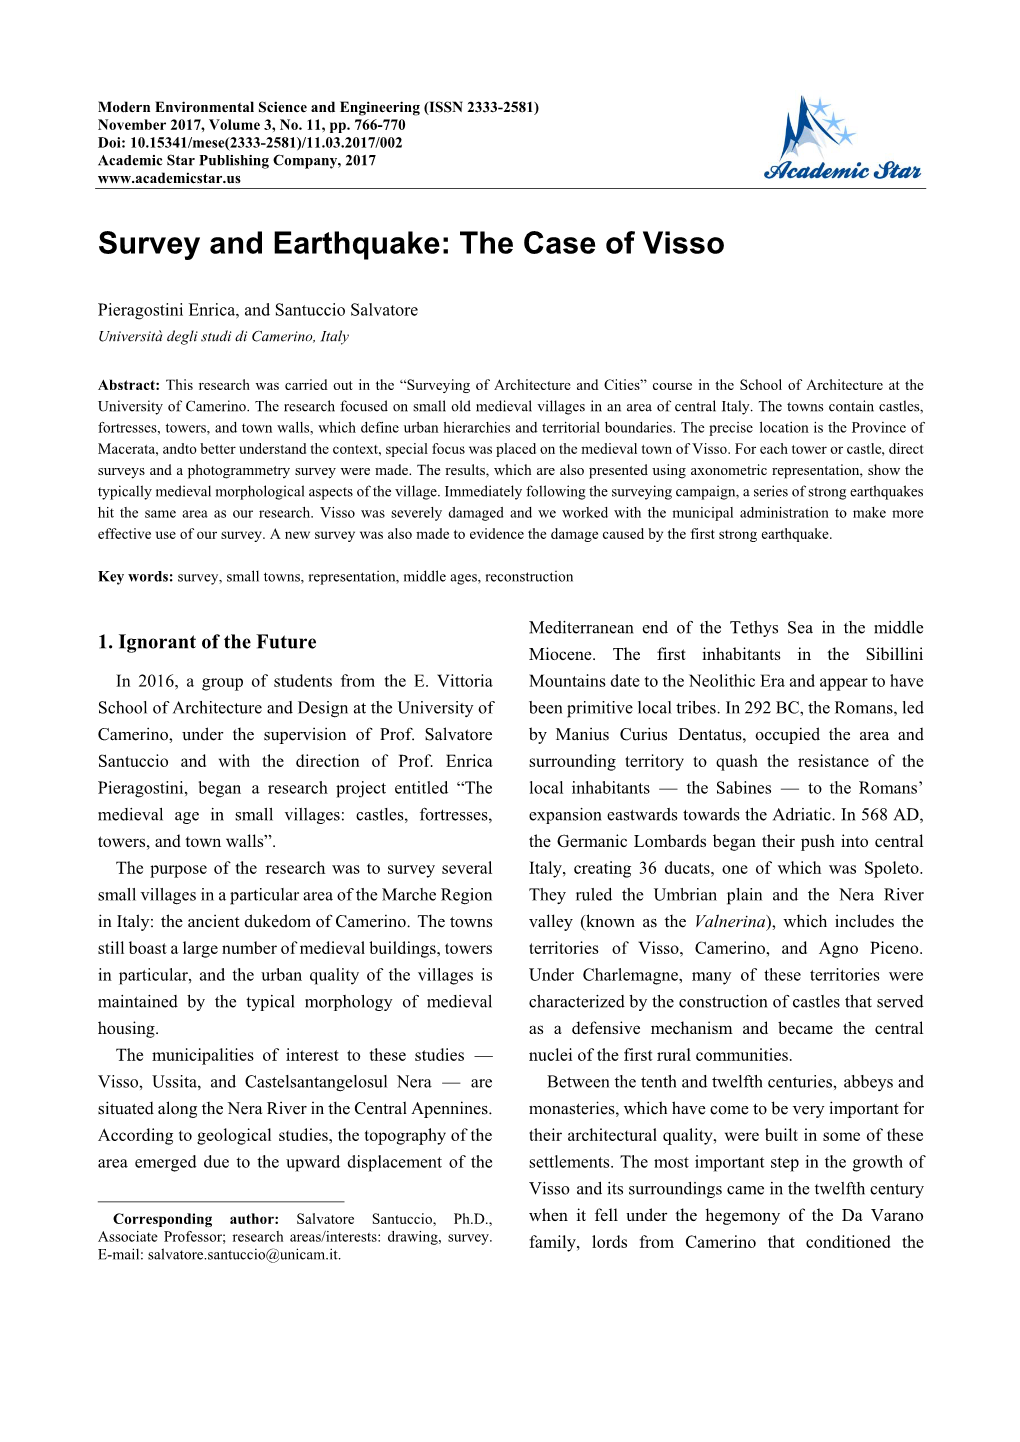 Survey and Earthquake: the Case of Visso